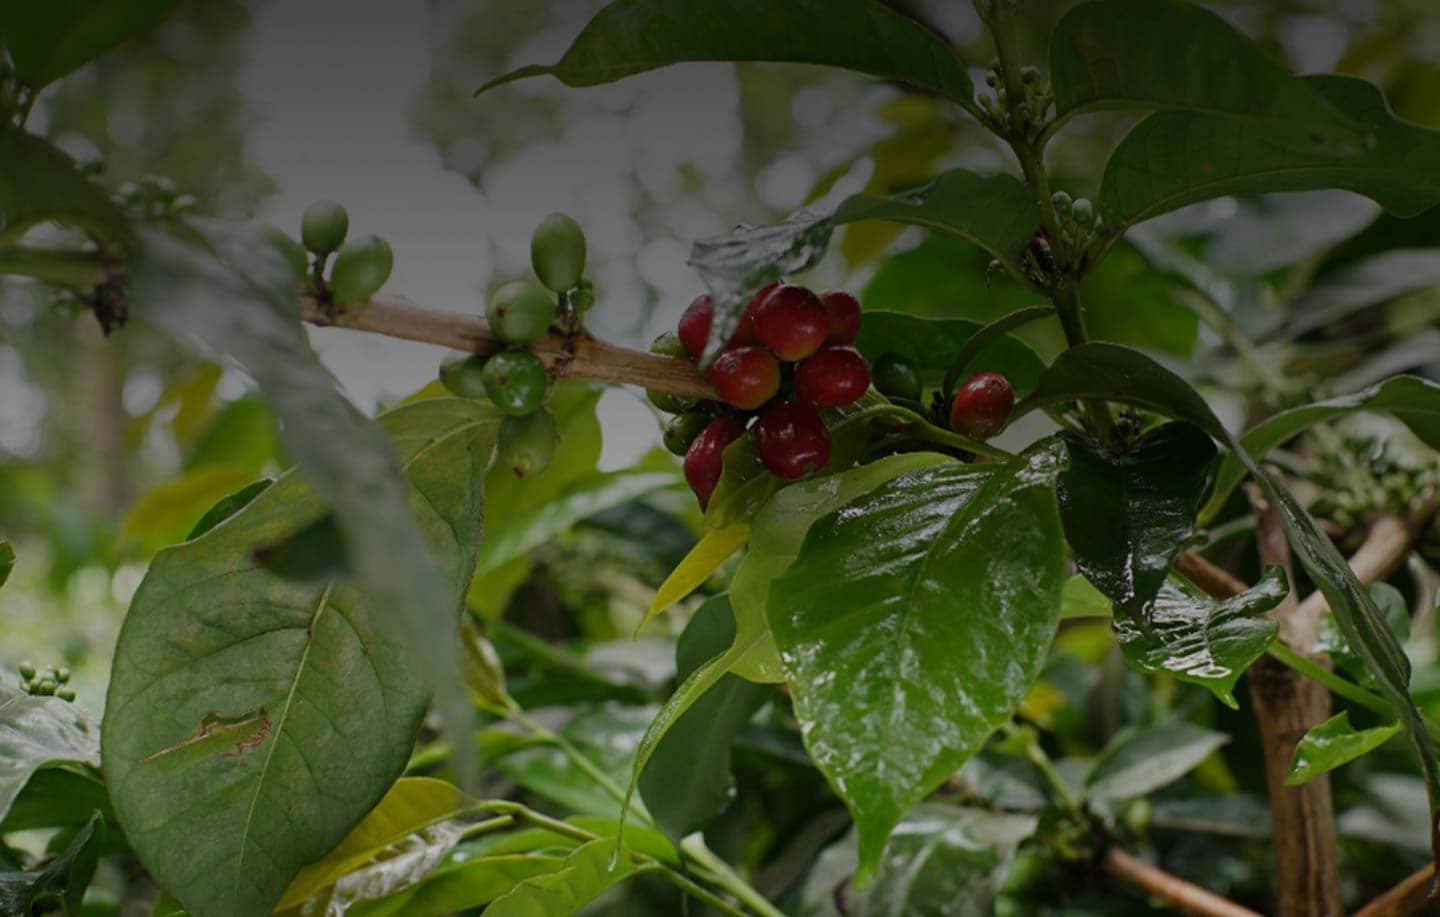 Coffee plantations around the world, each country has its own taste